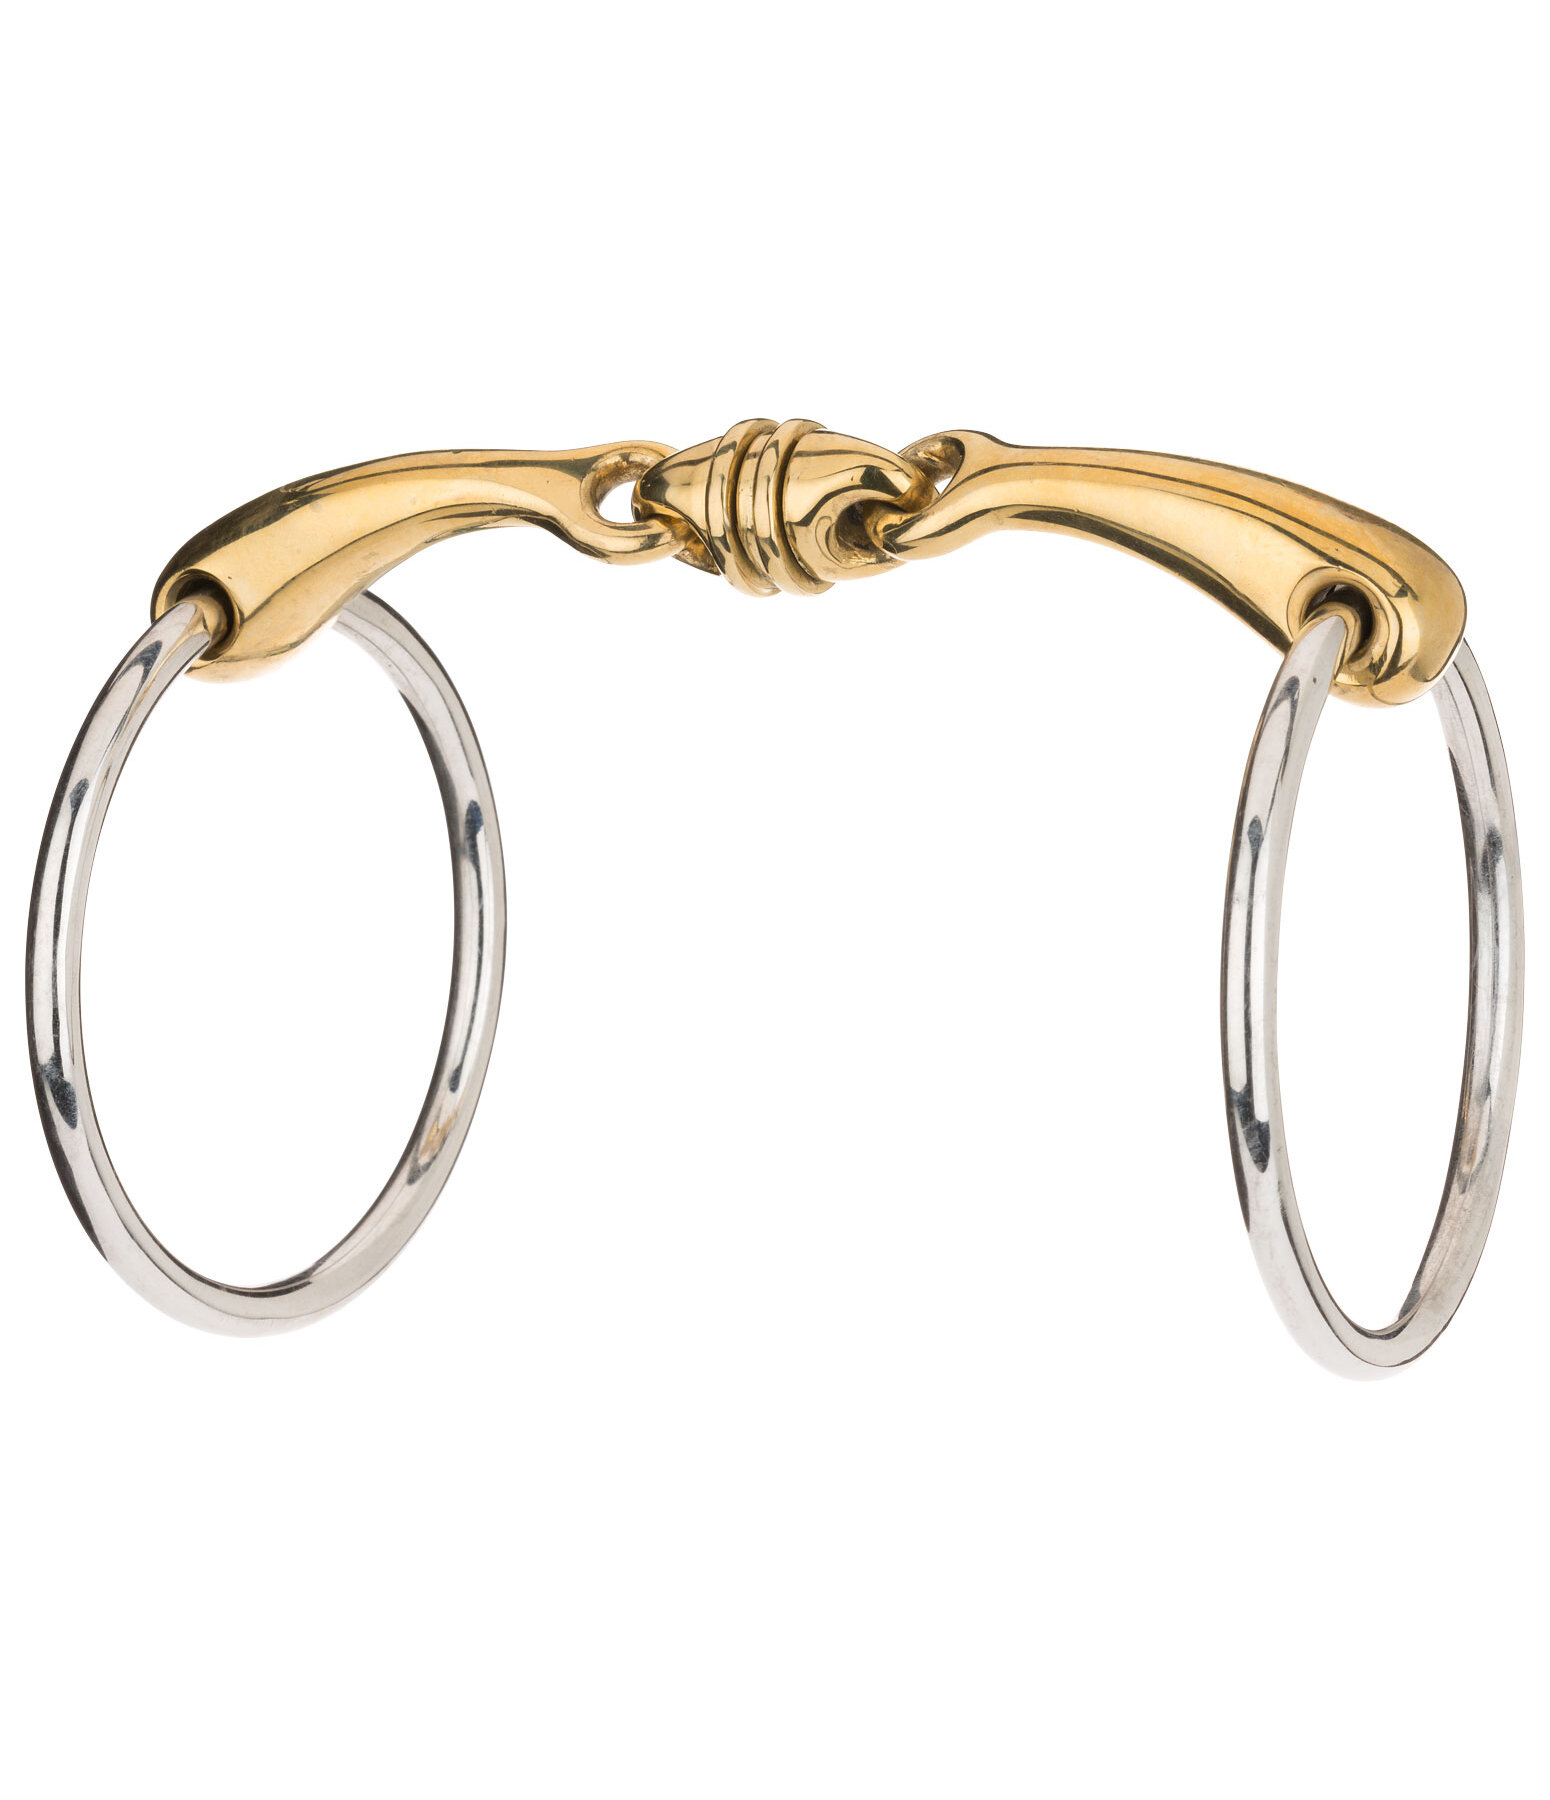 Loose Ring Snaffle Bit Anatomical Roll Double Jointed